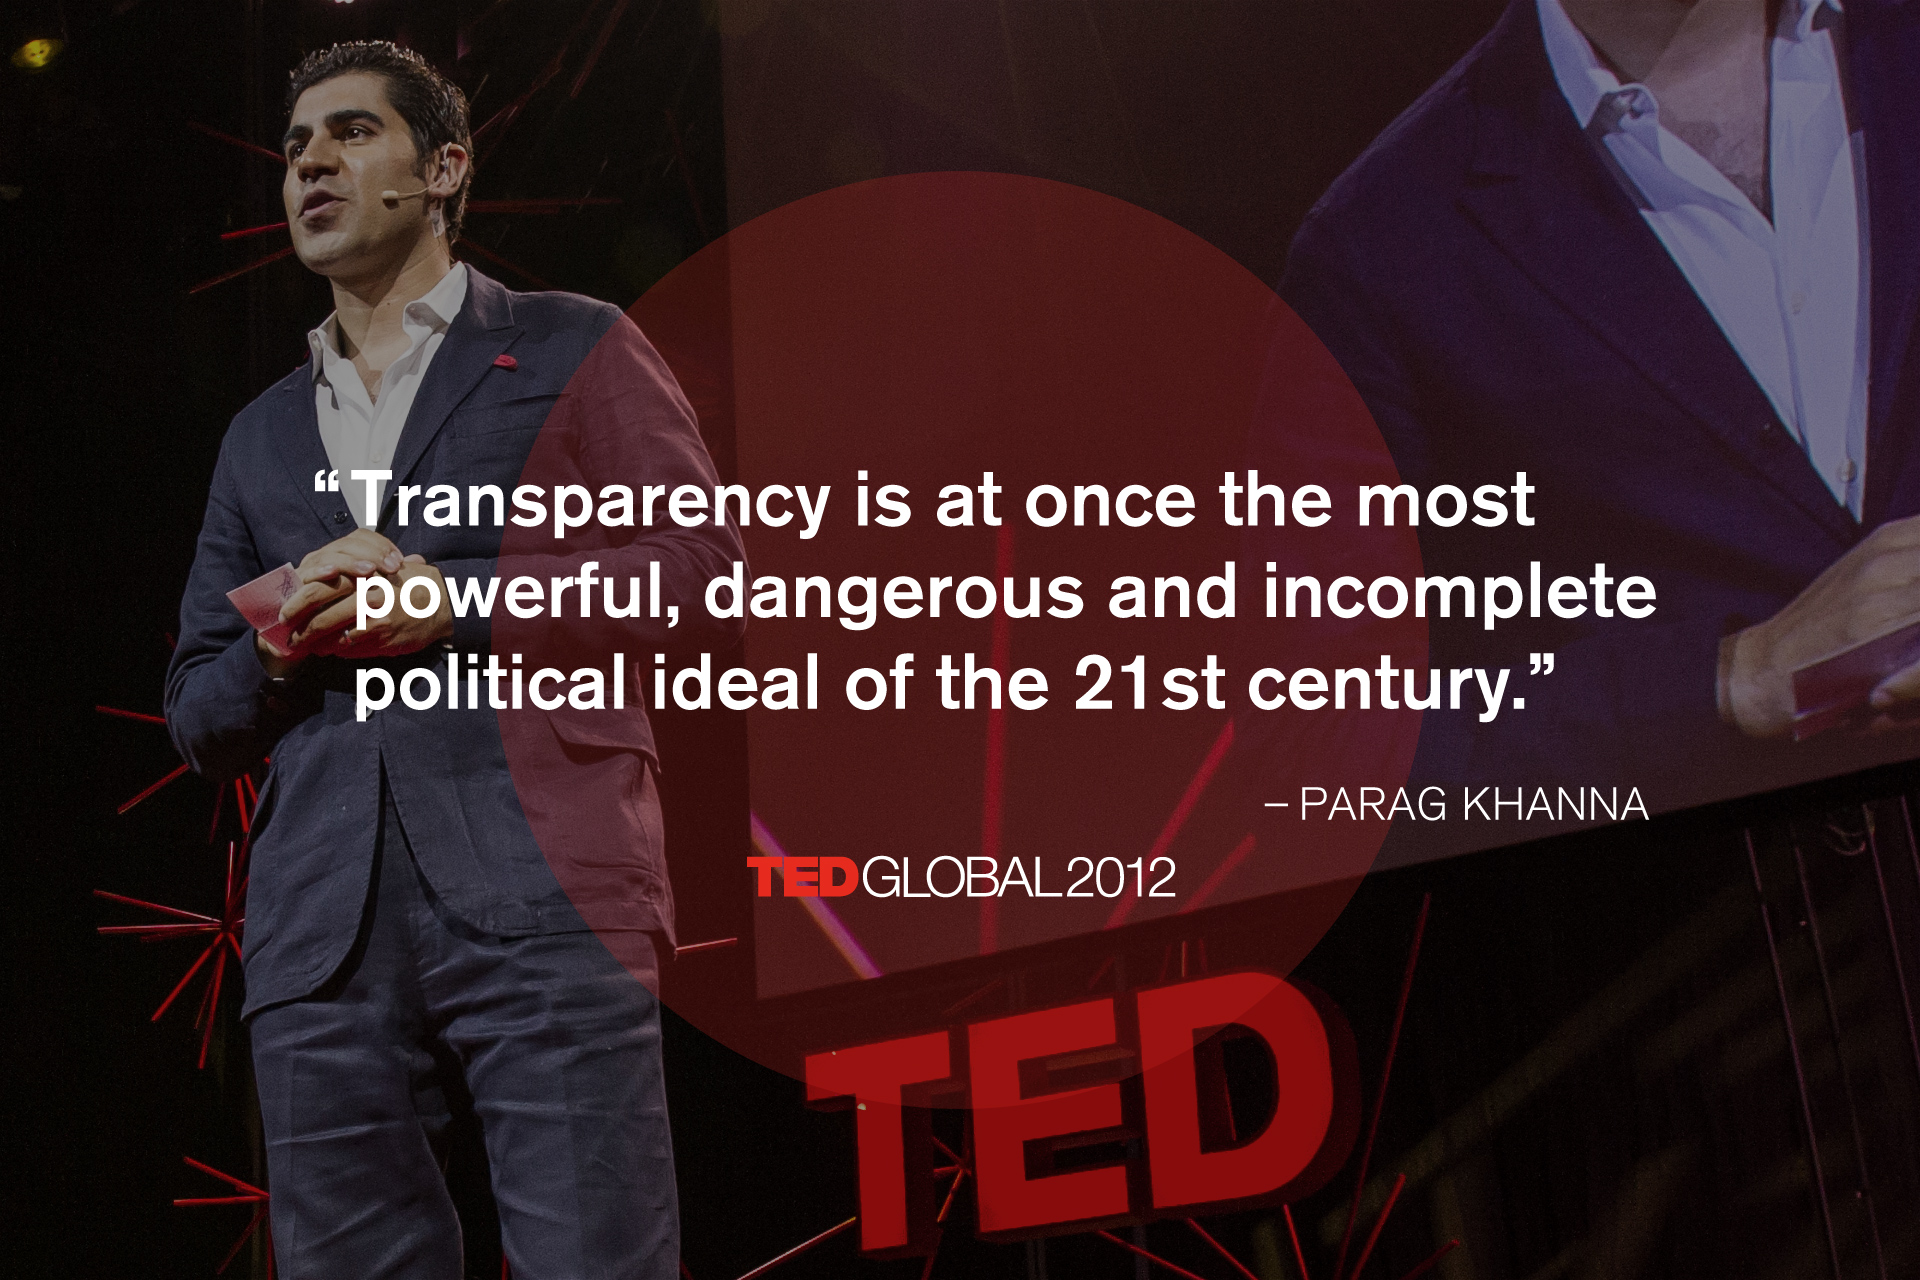 TED Global 2012: The upside of transparency